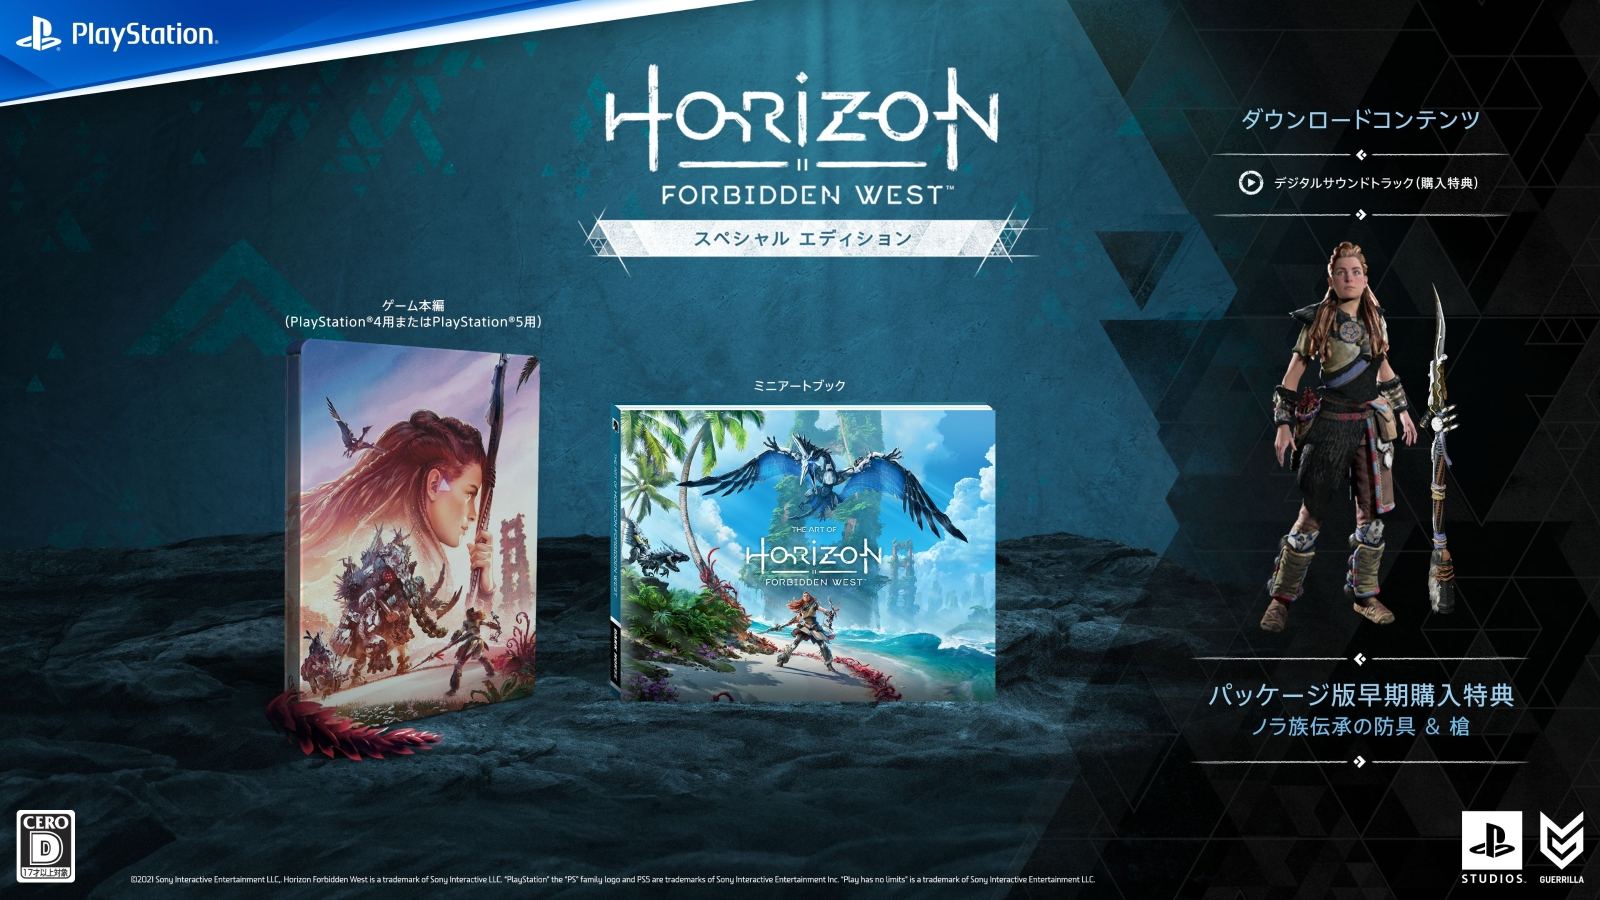 Horizon Forbidden West [Special Edition] for PlayStation 5